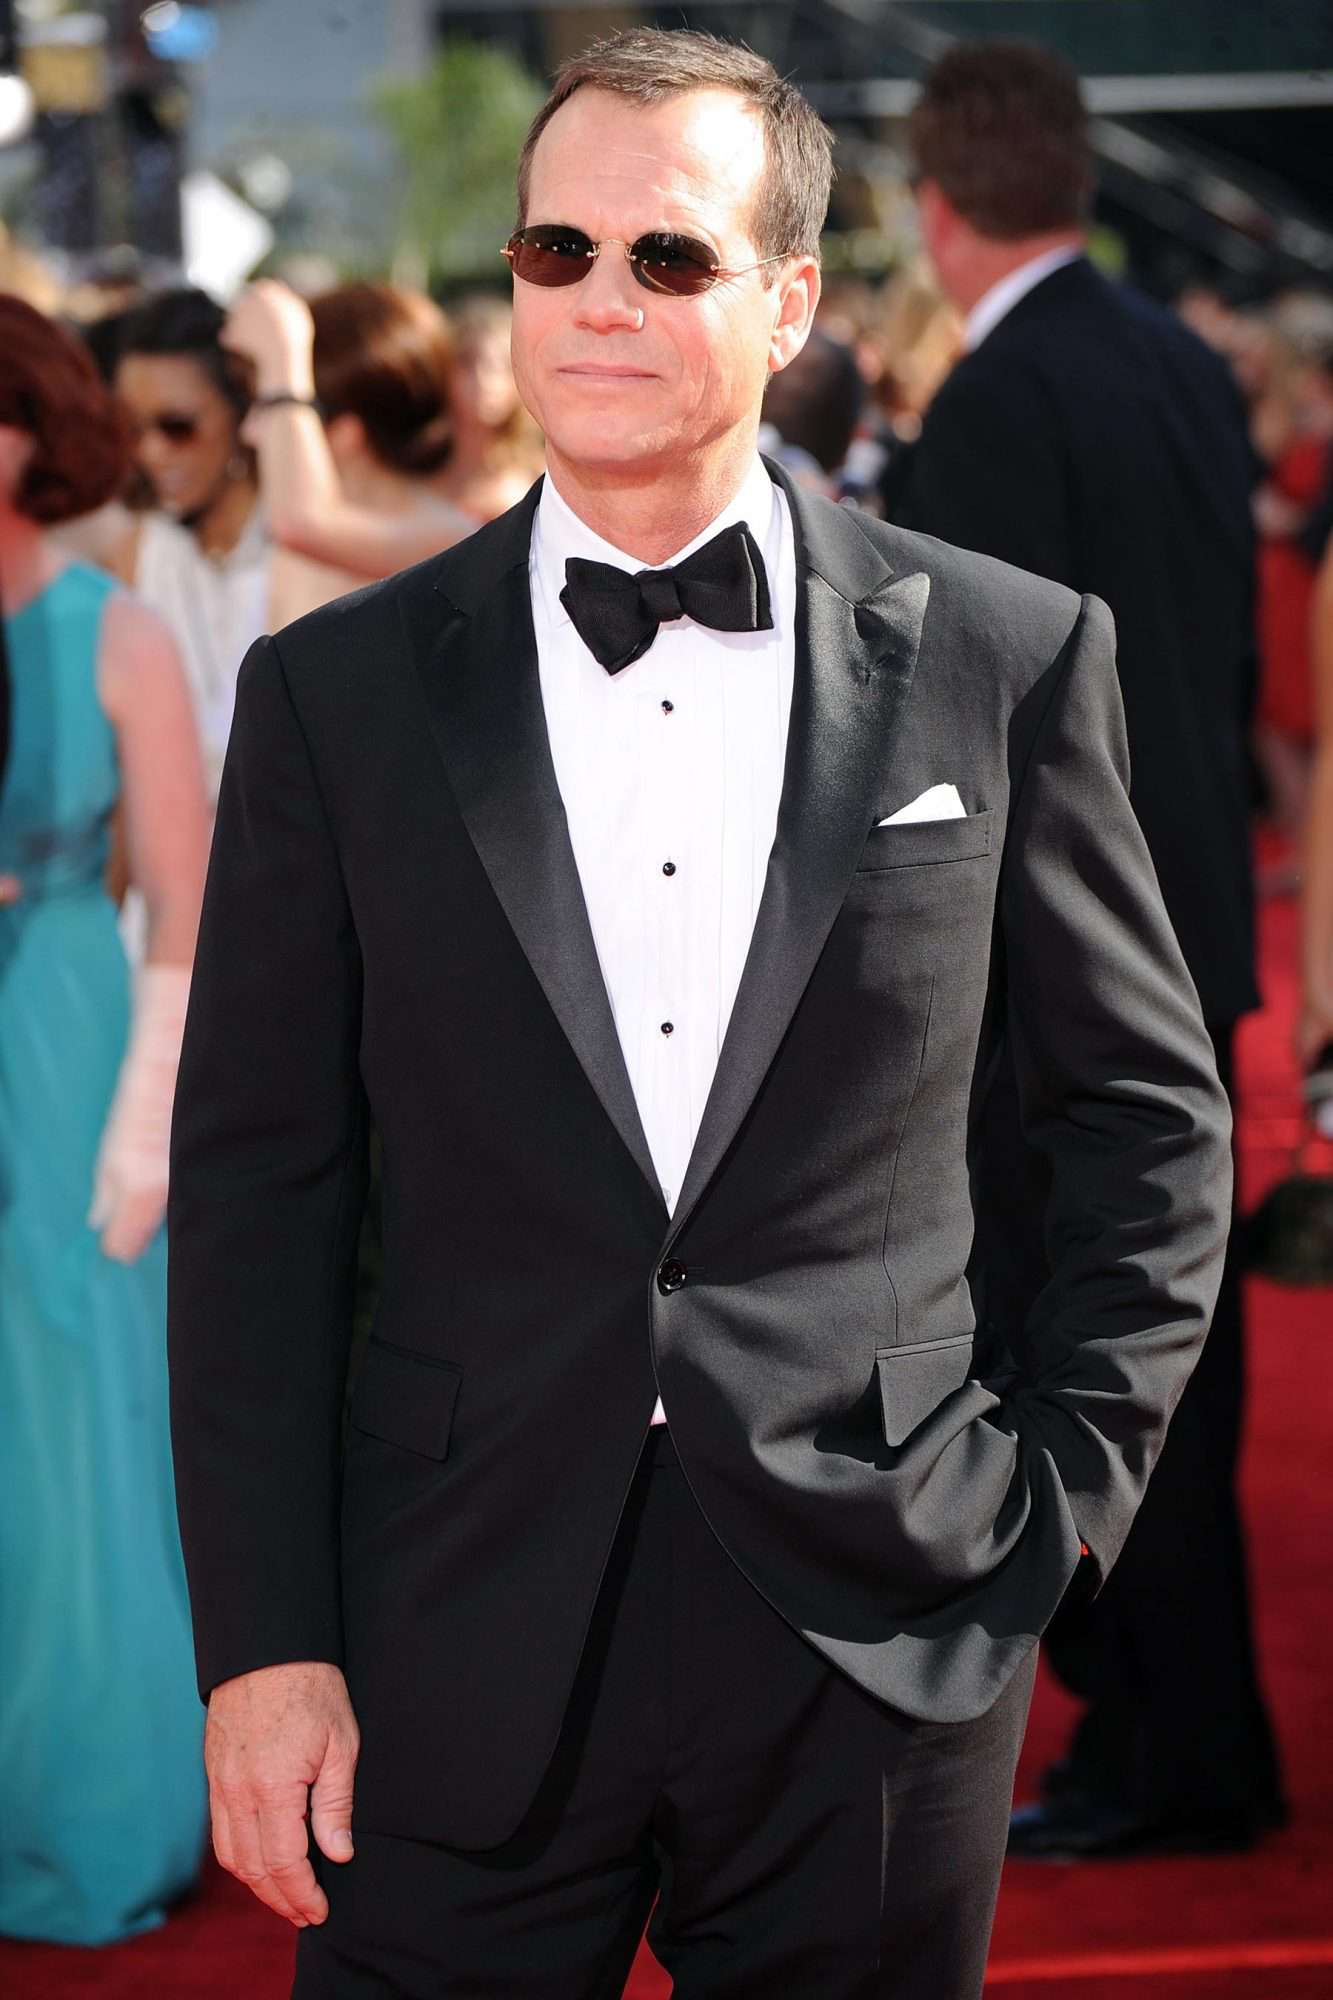 Bill Paxton at the 61st Primetime Emmy Awards in Los Angeles&nbsp;on September 20, 2009